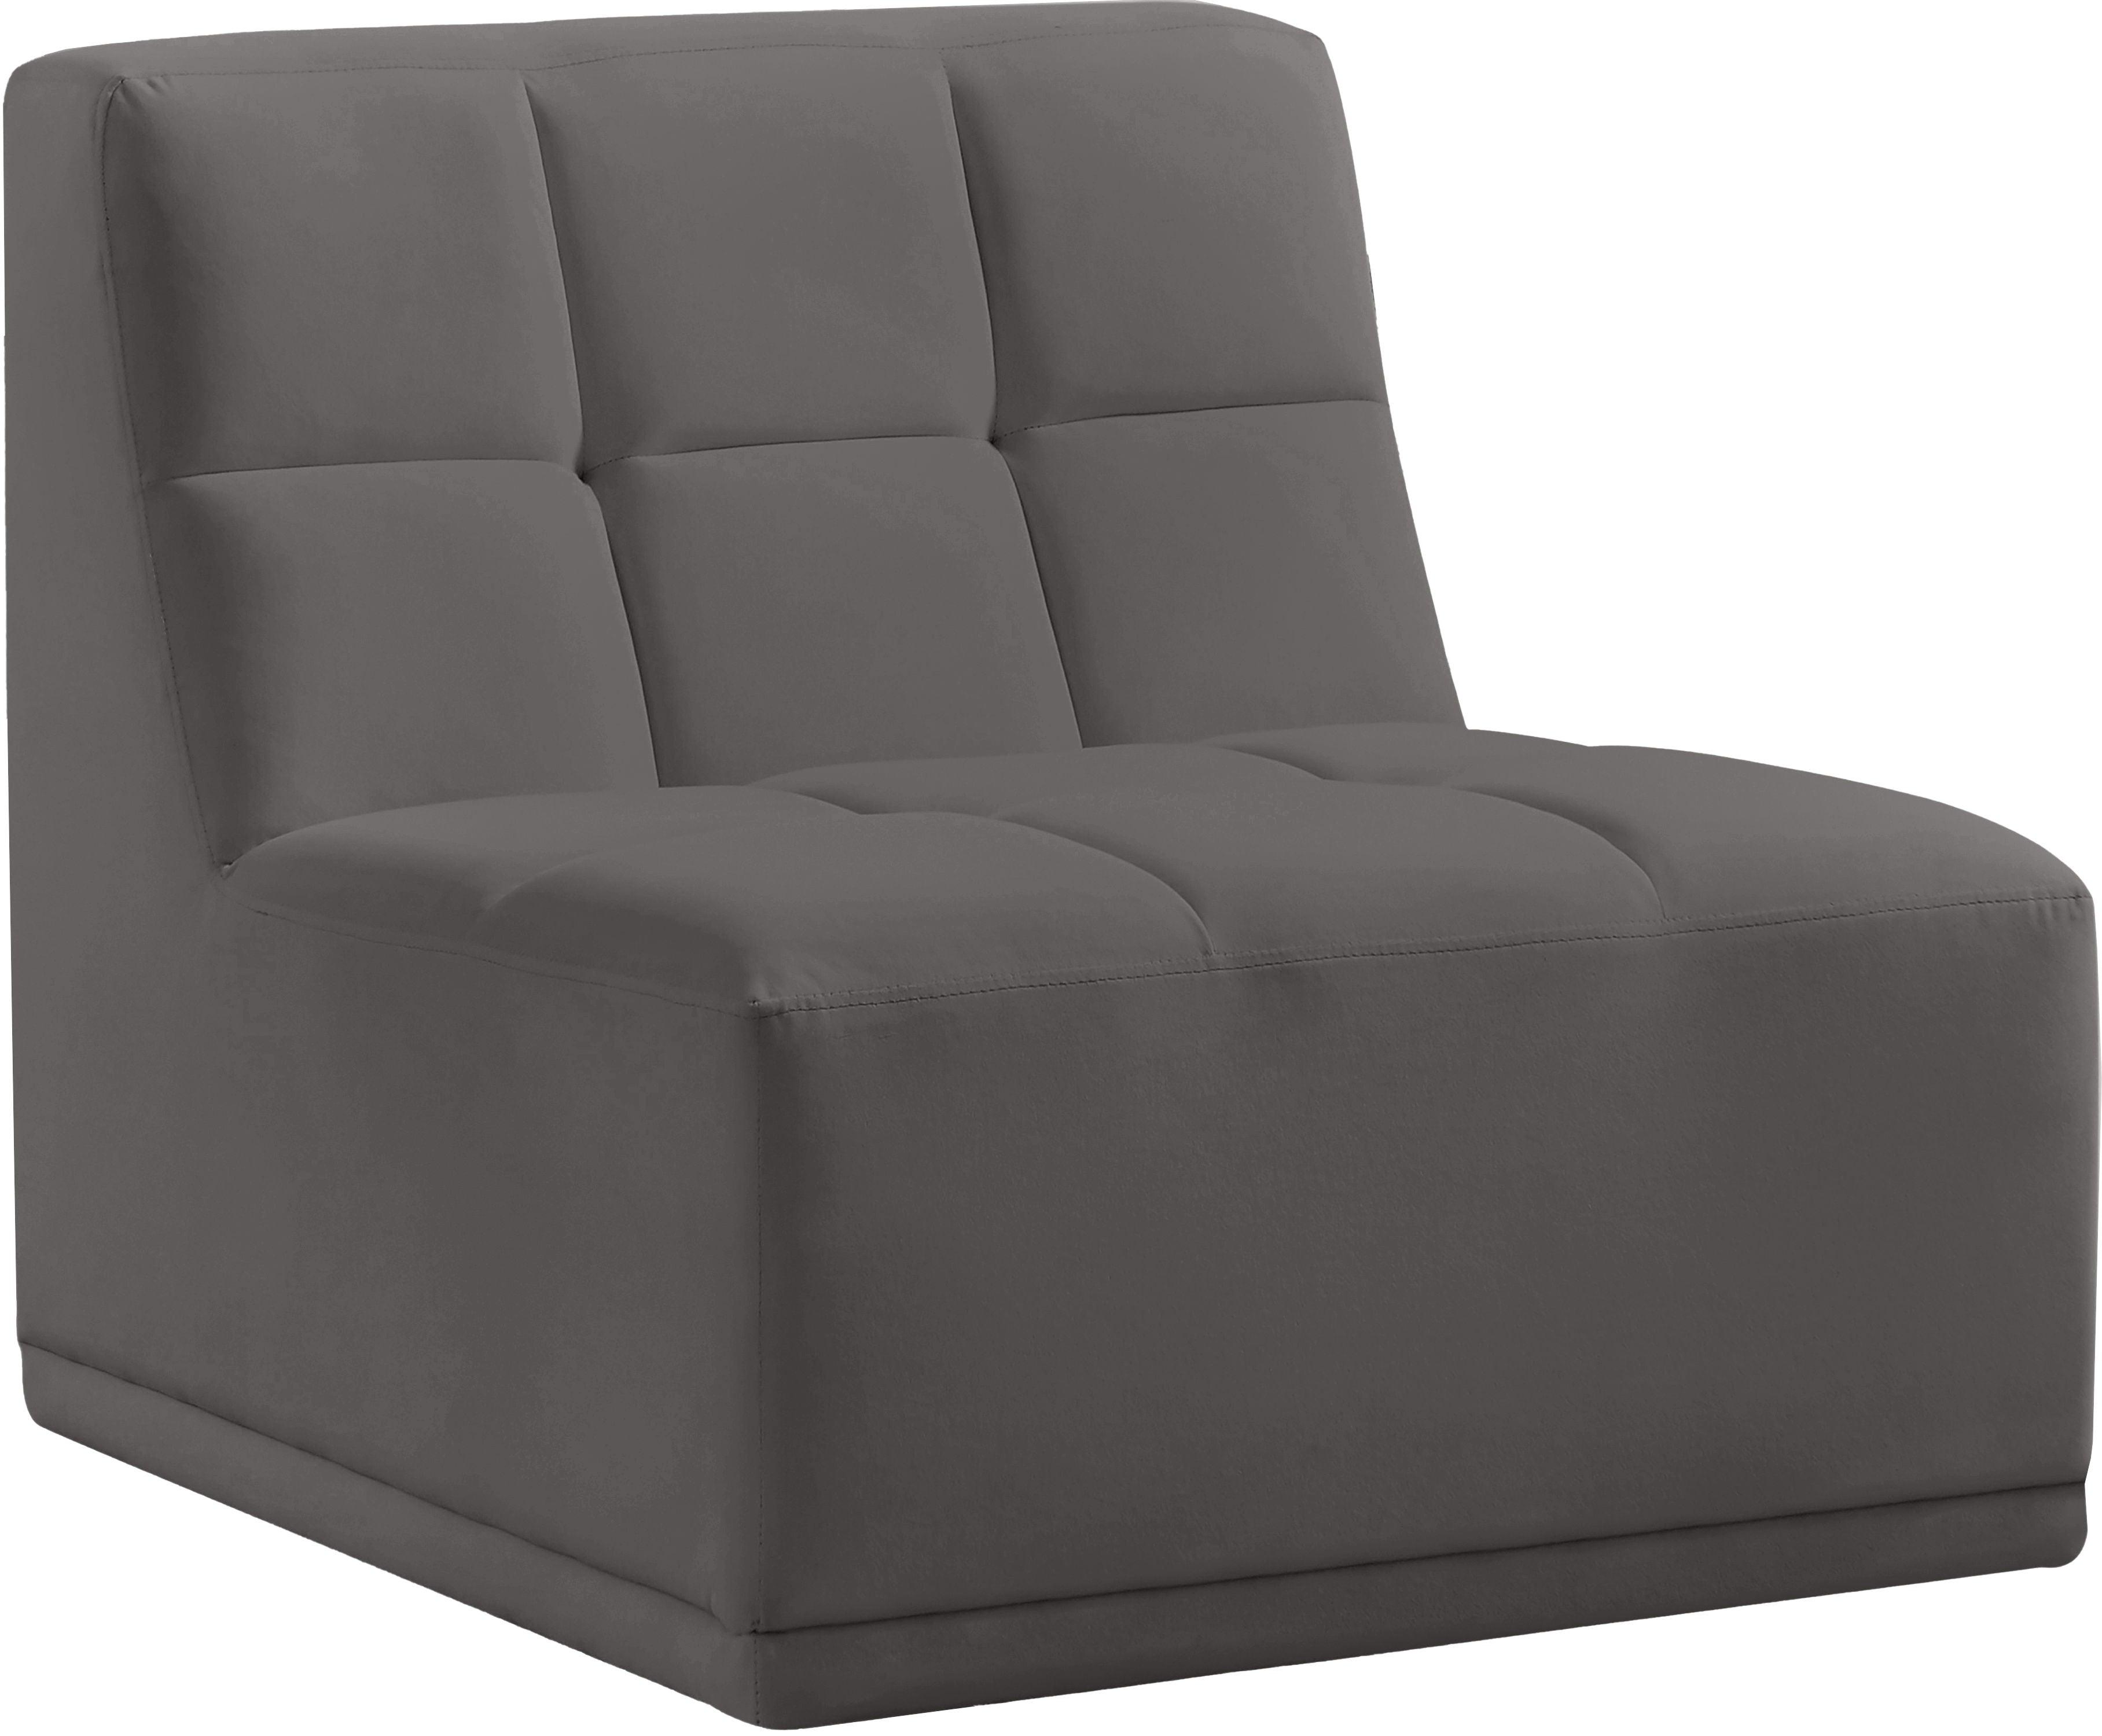 Meridian Furniture - Relax - Armless Chair - Gray - 5th Avenue Furniture